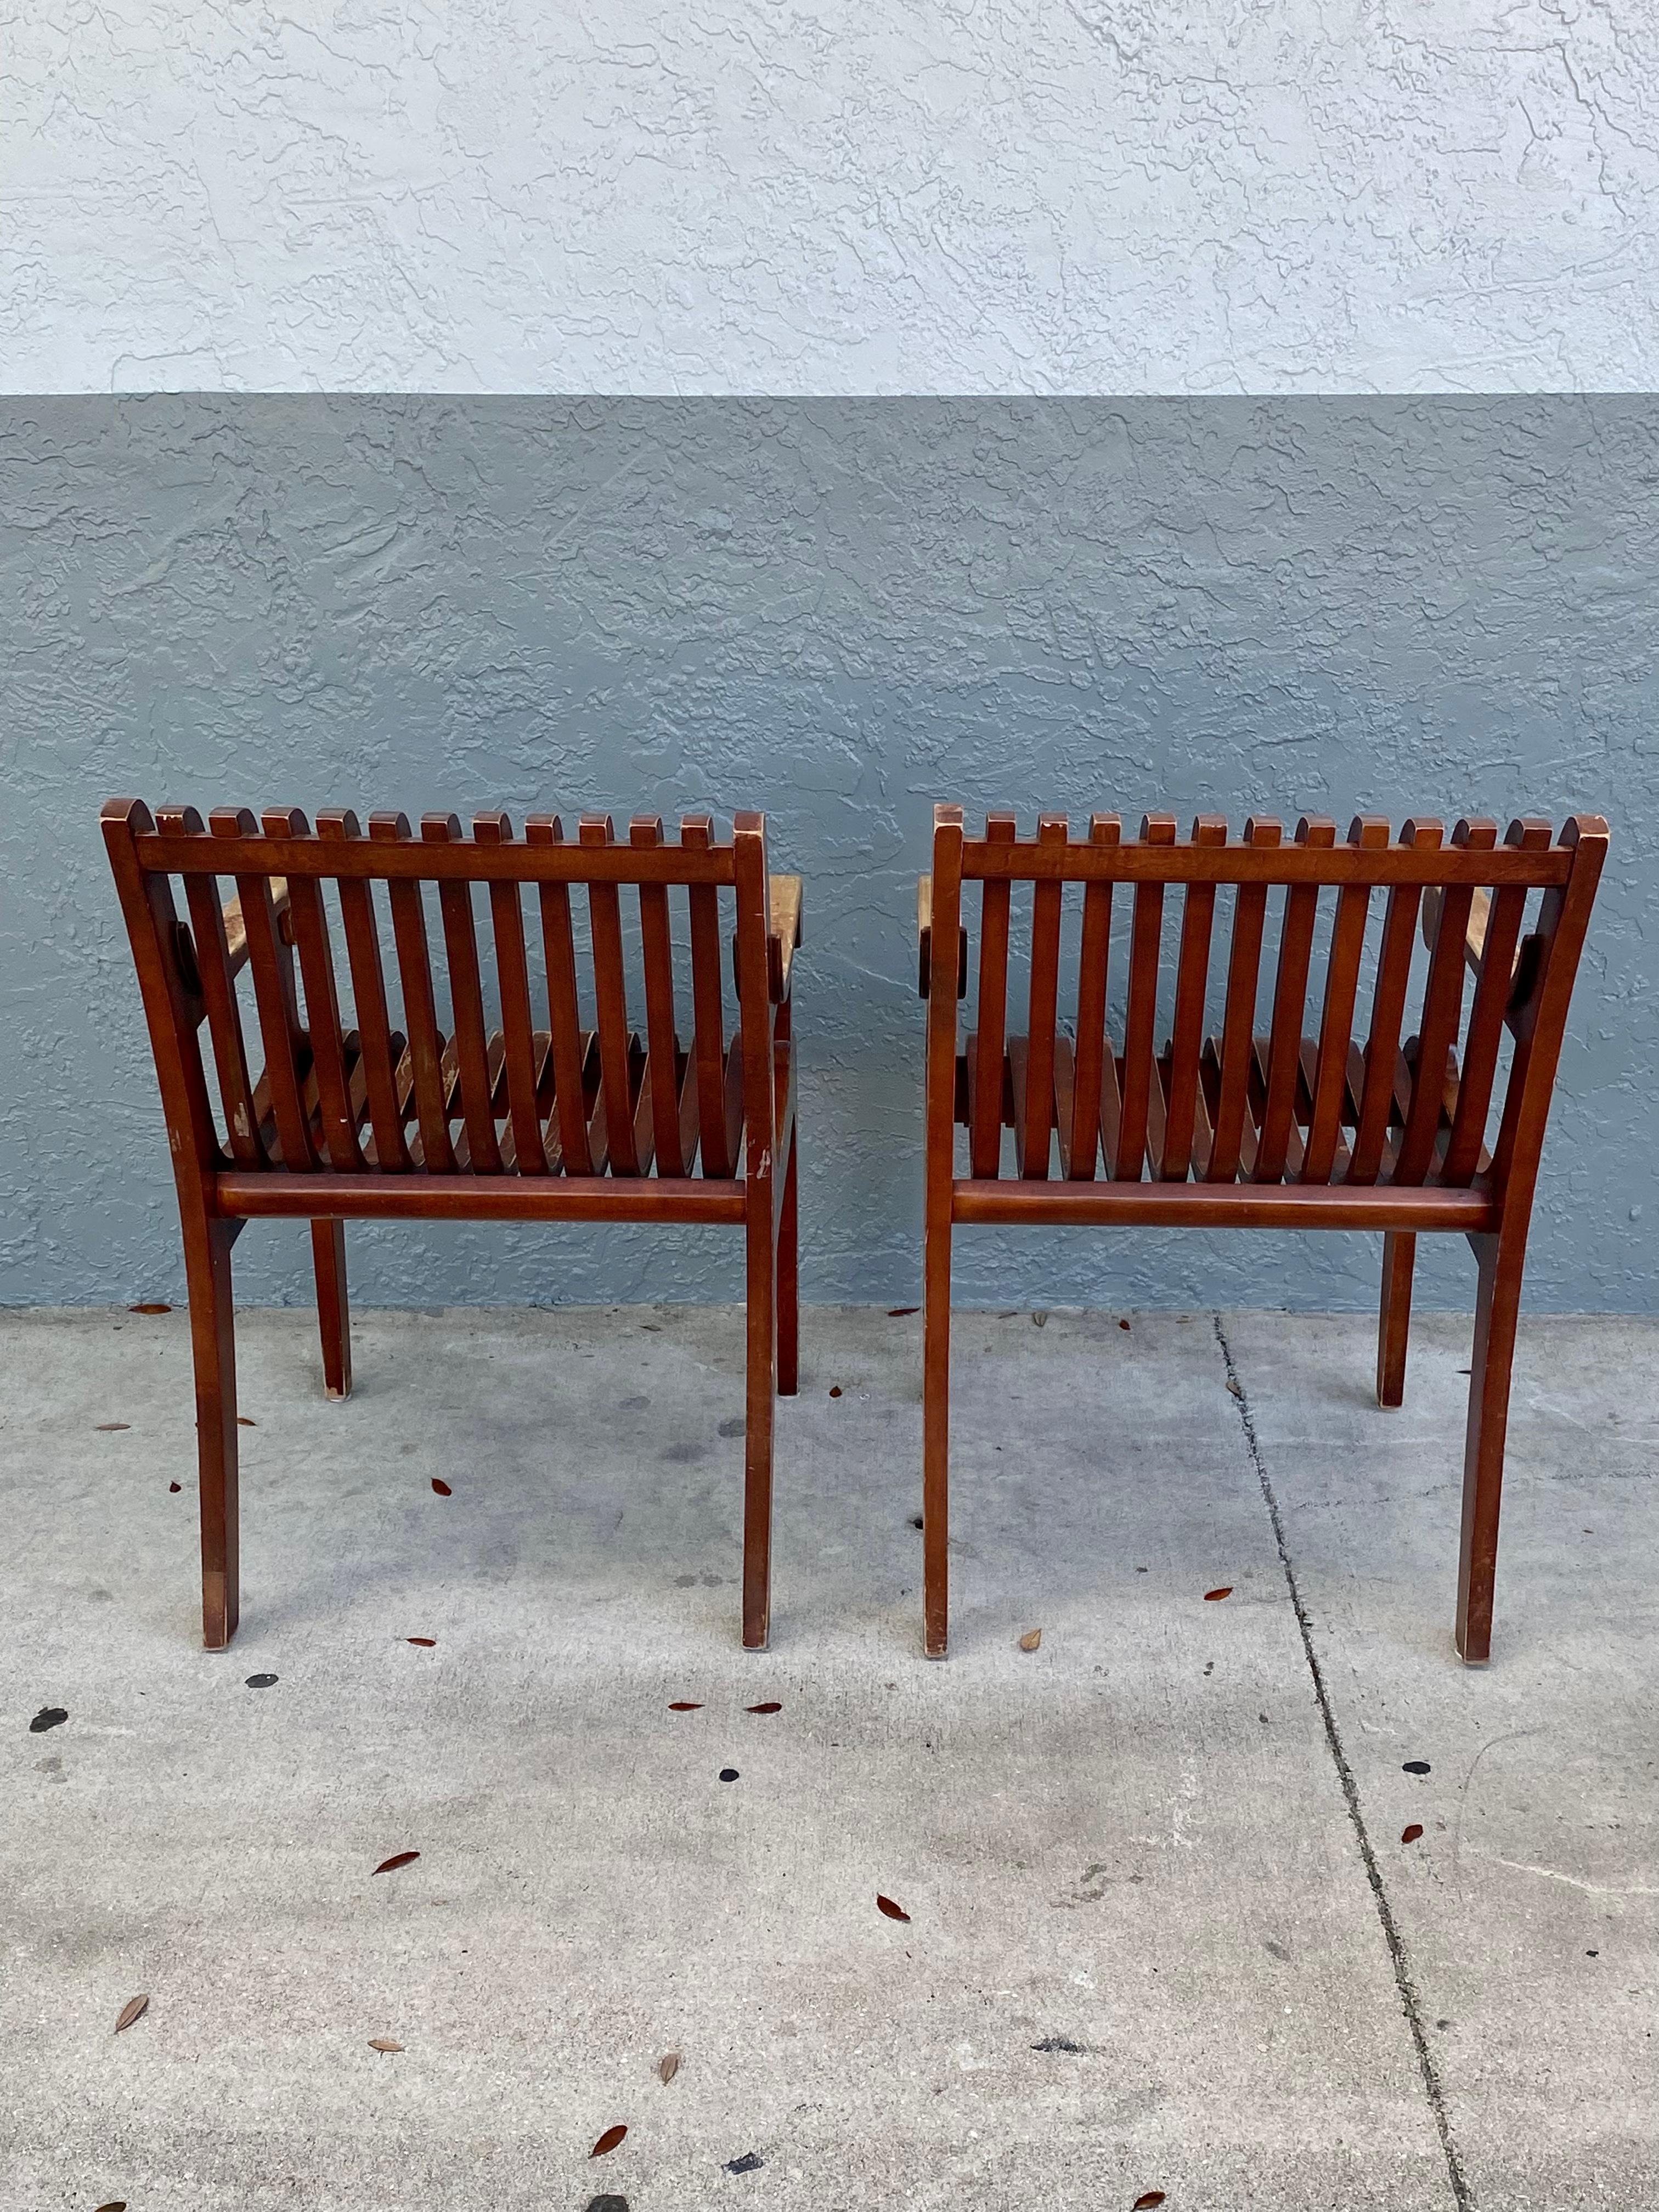 1950s Sculptural Teak Curved Slatted Bentwood Scroll Armchairs, Set of 2 For Sale 3